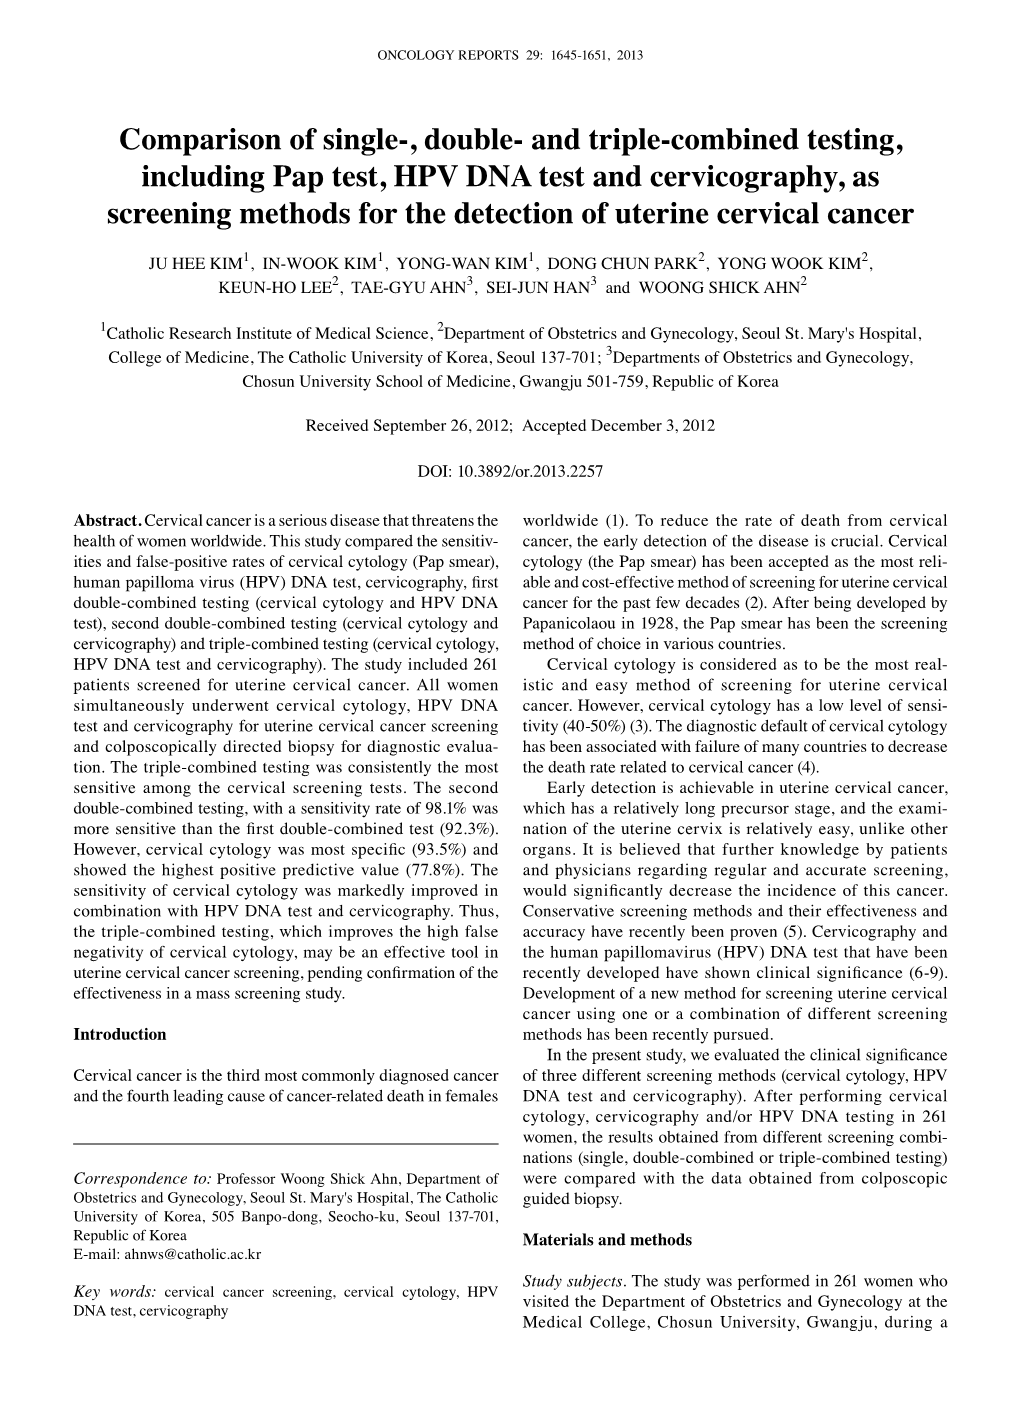 And Triple-Combined Testing, Including Pap Test, HPV DNA Test and Cervicography, As Screening Methods for the Detection of Uterine Cervical Cancer